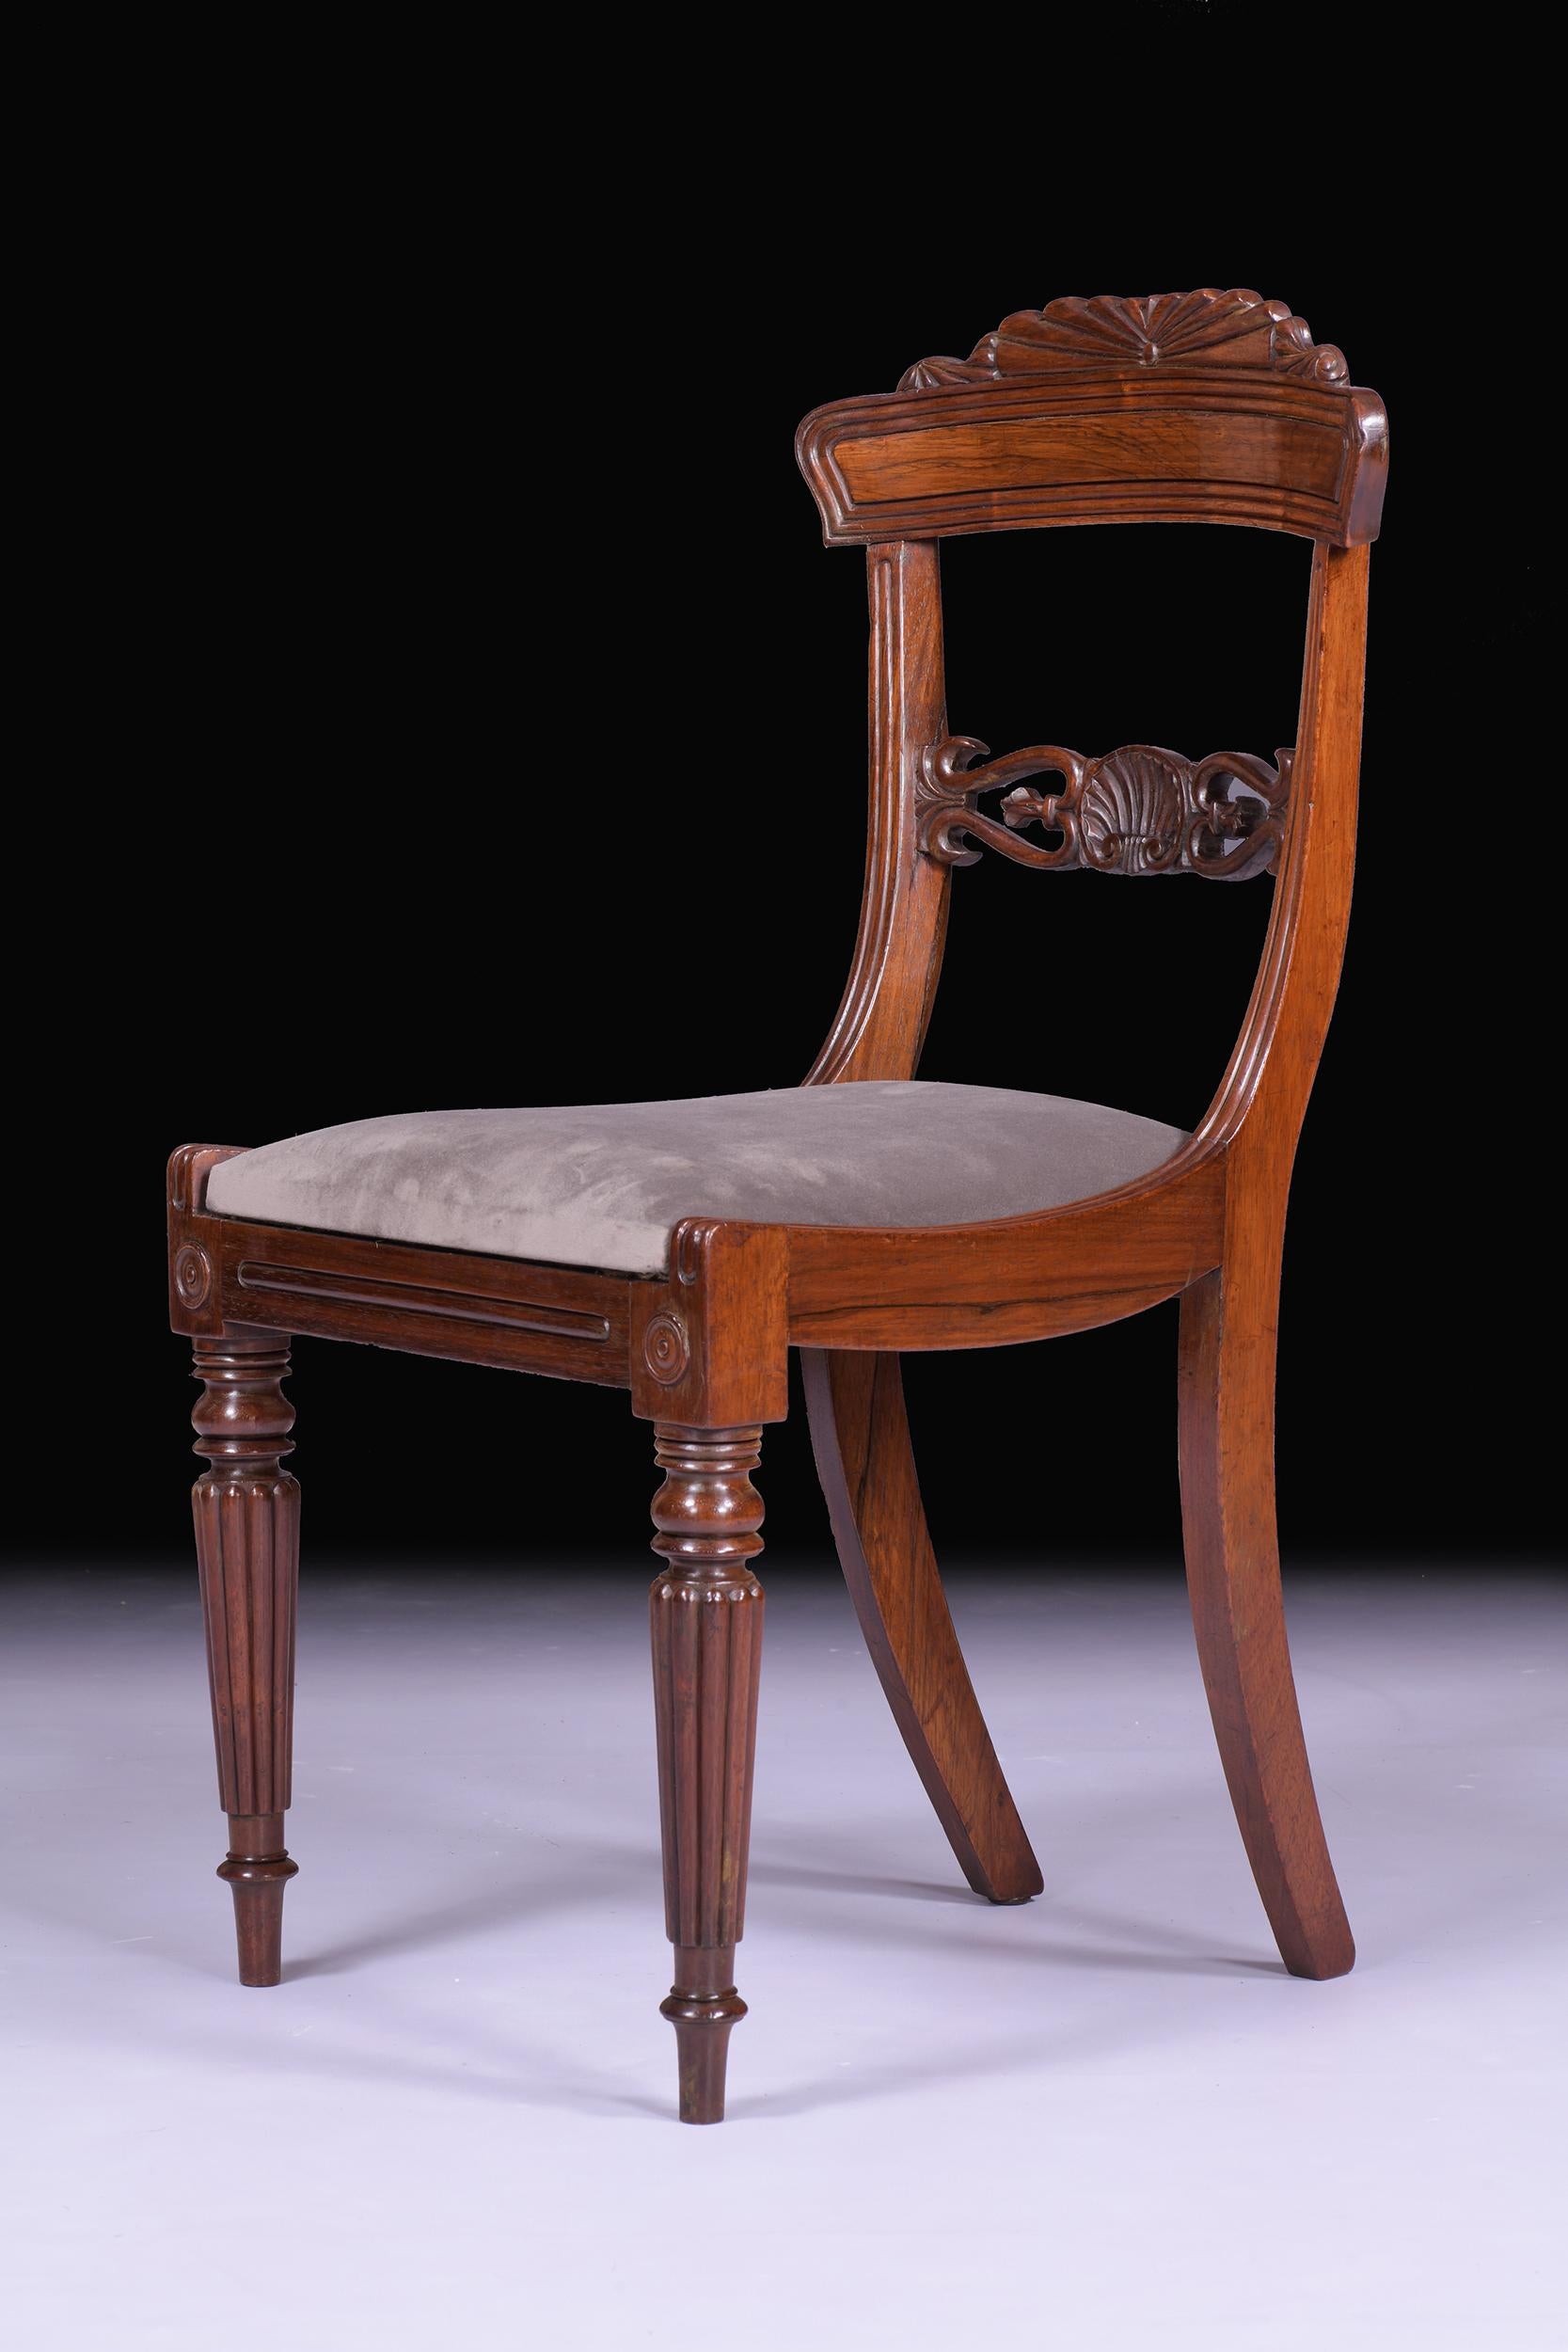 Wood Set Of 6 Early 19th Century English Regency Chairs Attributed To Gillows  For Sale